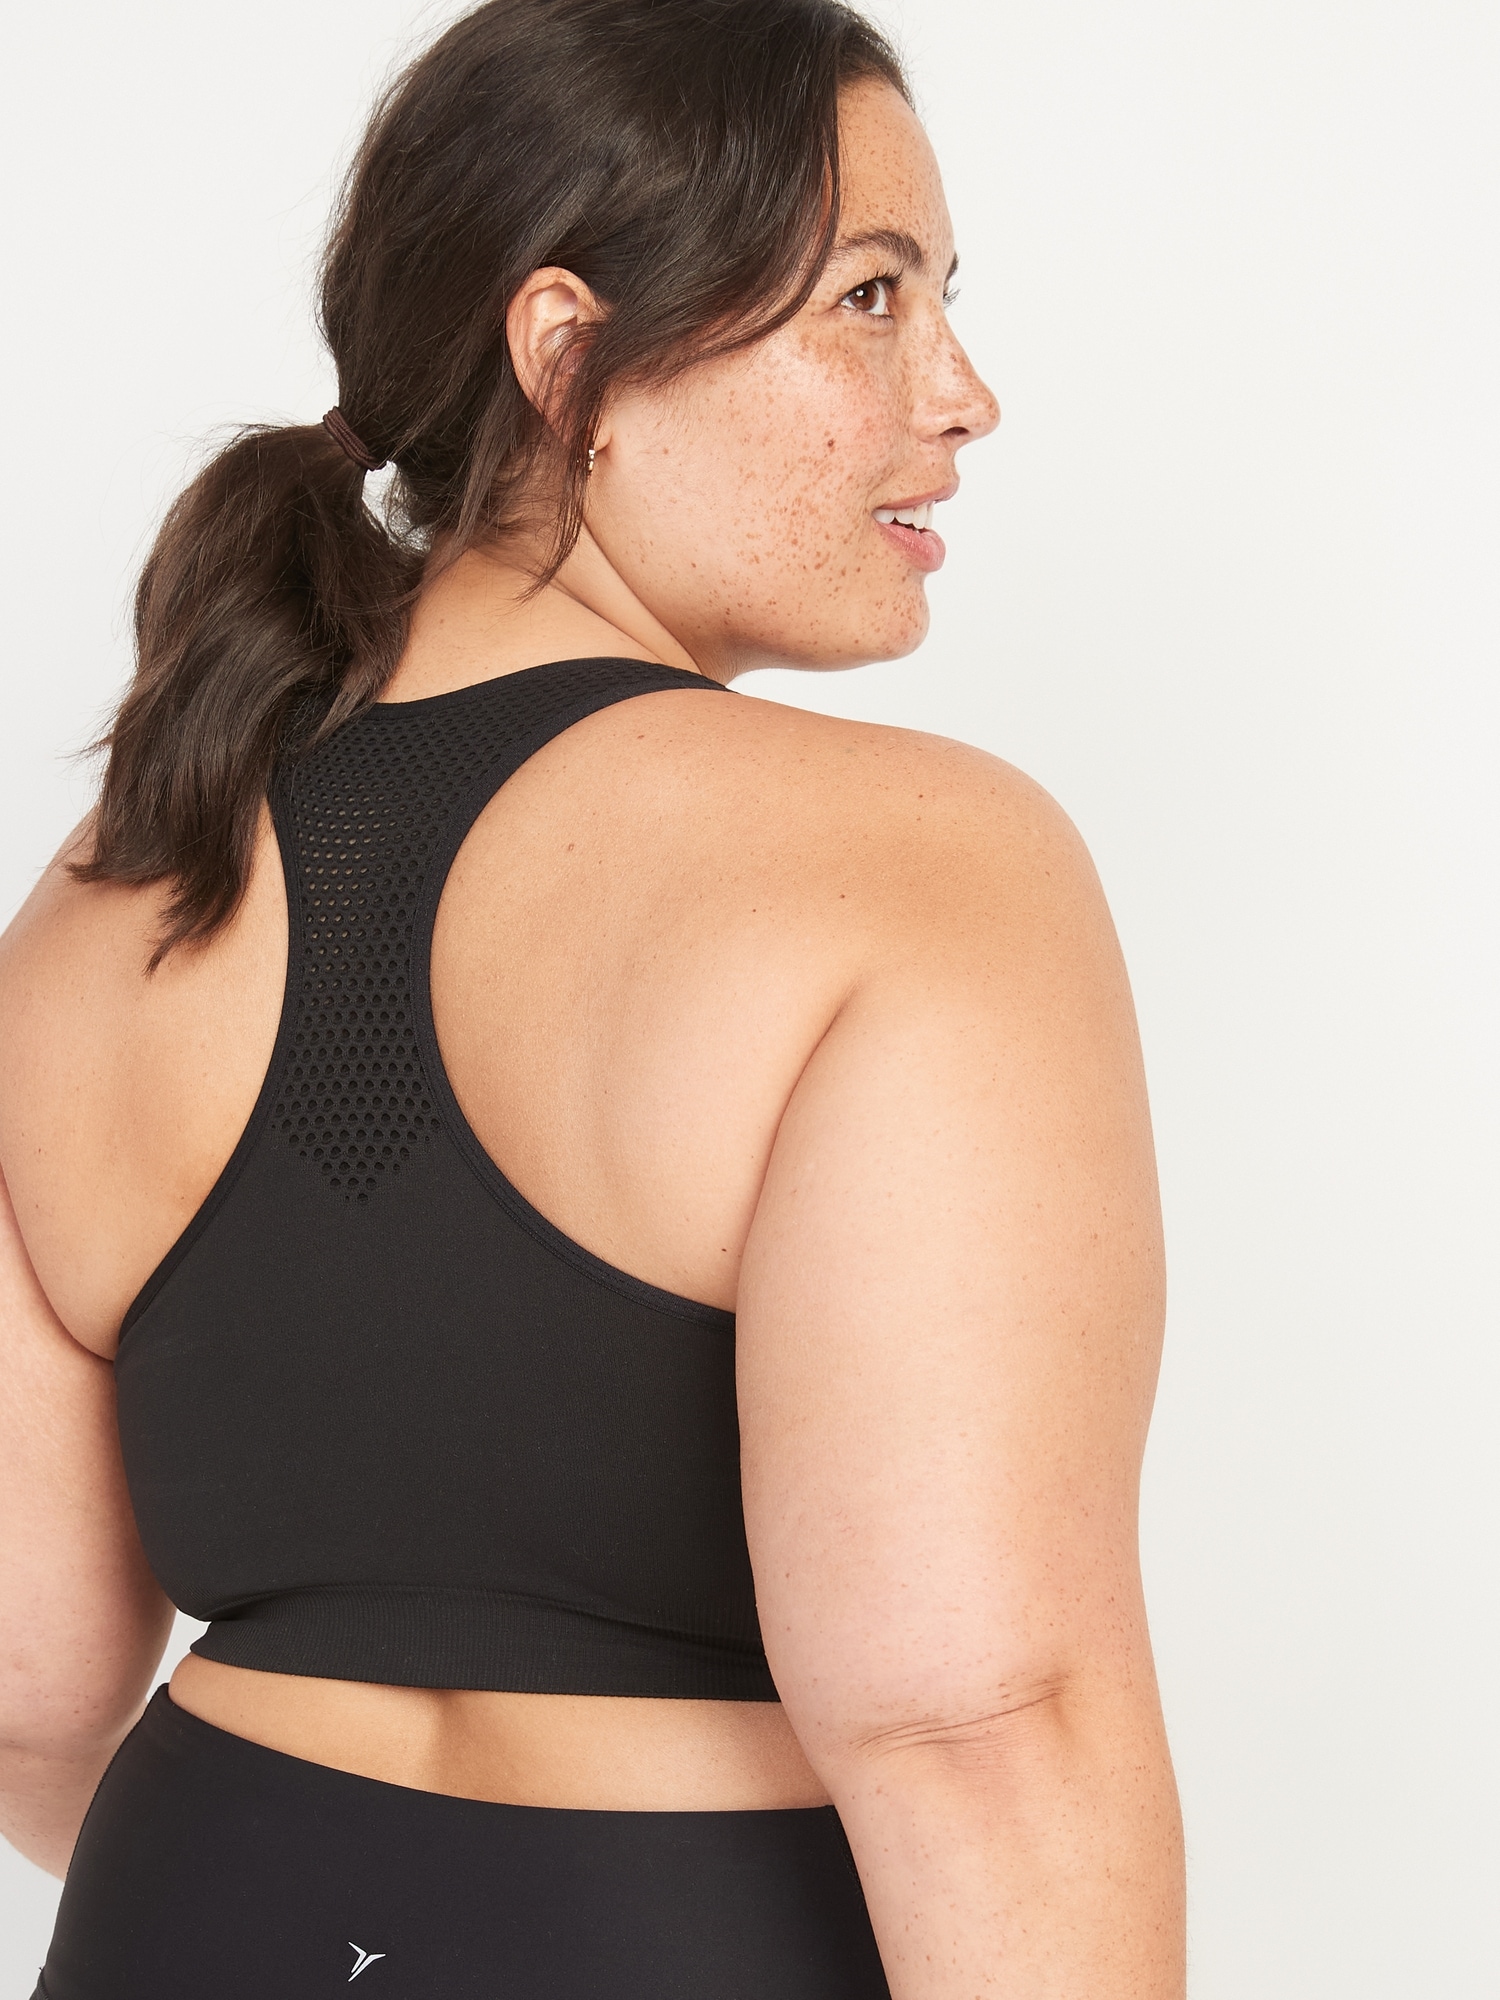 Save Over 77% Off Size-Inclusive Sports Bras at Nordstrom, Old Navy, Athleta  and More